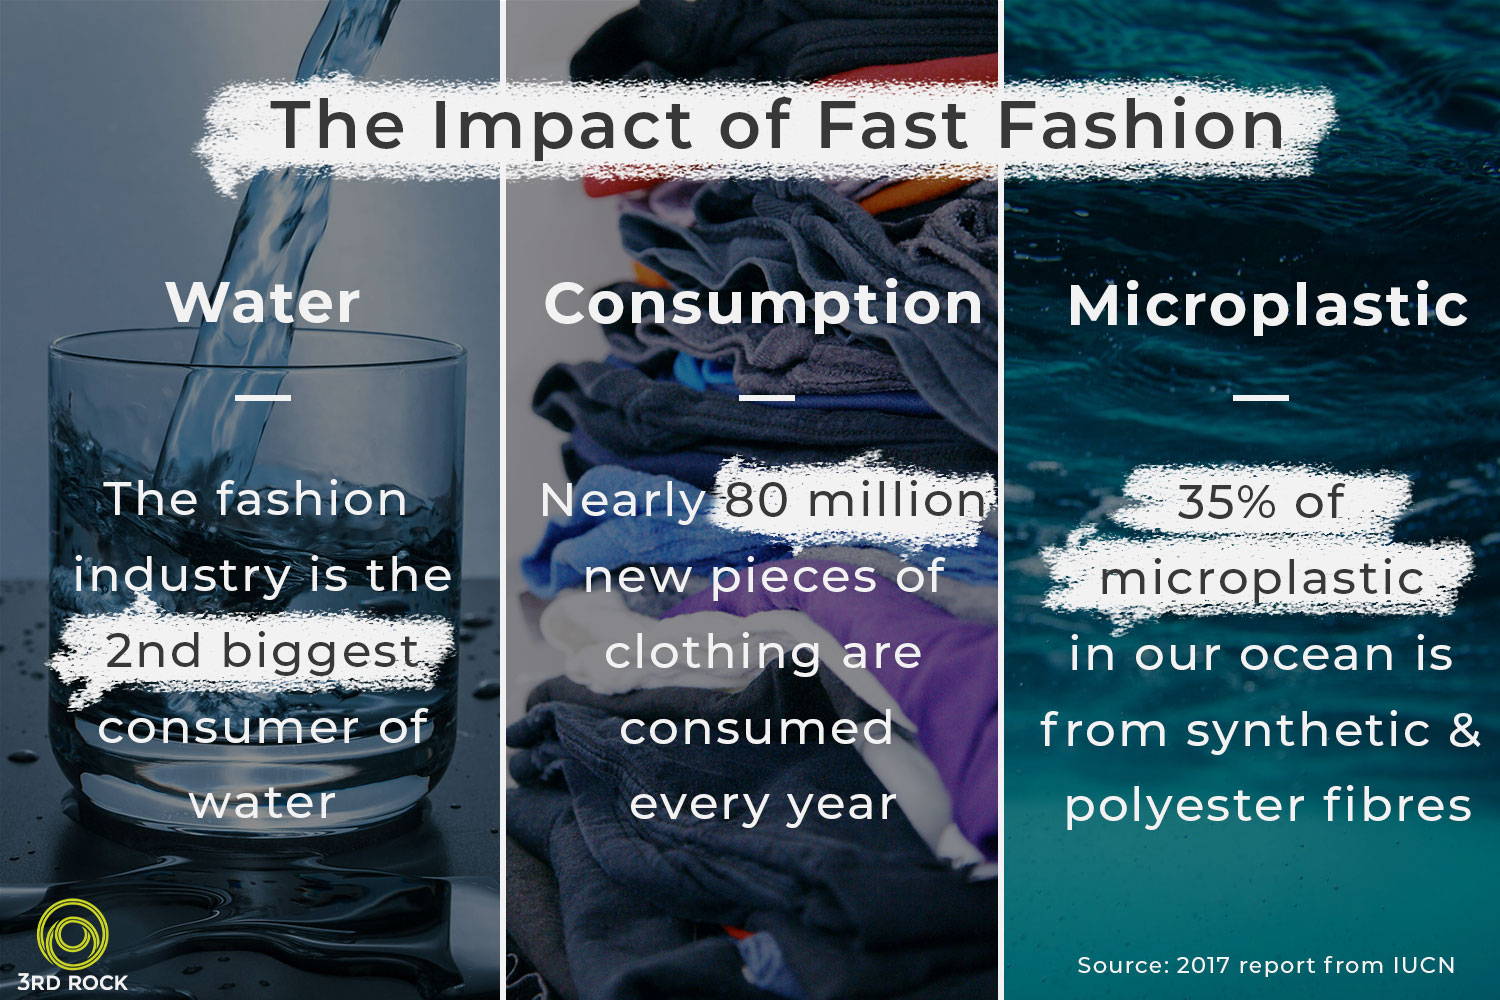 The impact of fast fashion on the environment. This image outlines the water usage, global consumption and attributes 35% of microplastic in our ocean to polyester/synthetic materials from clothing.